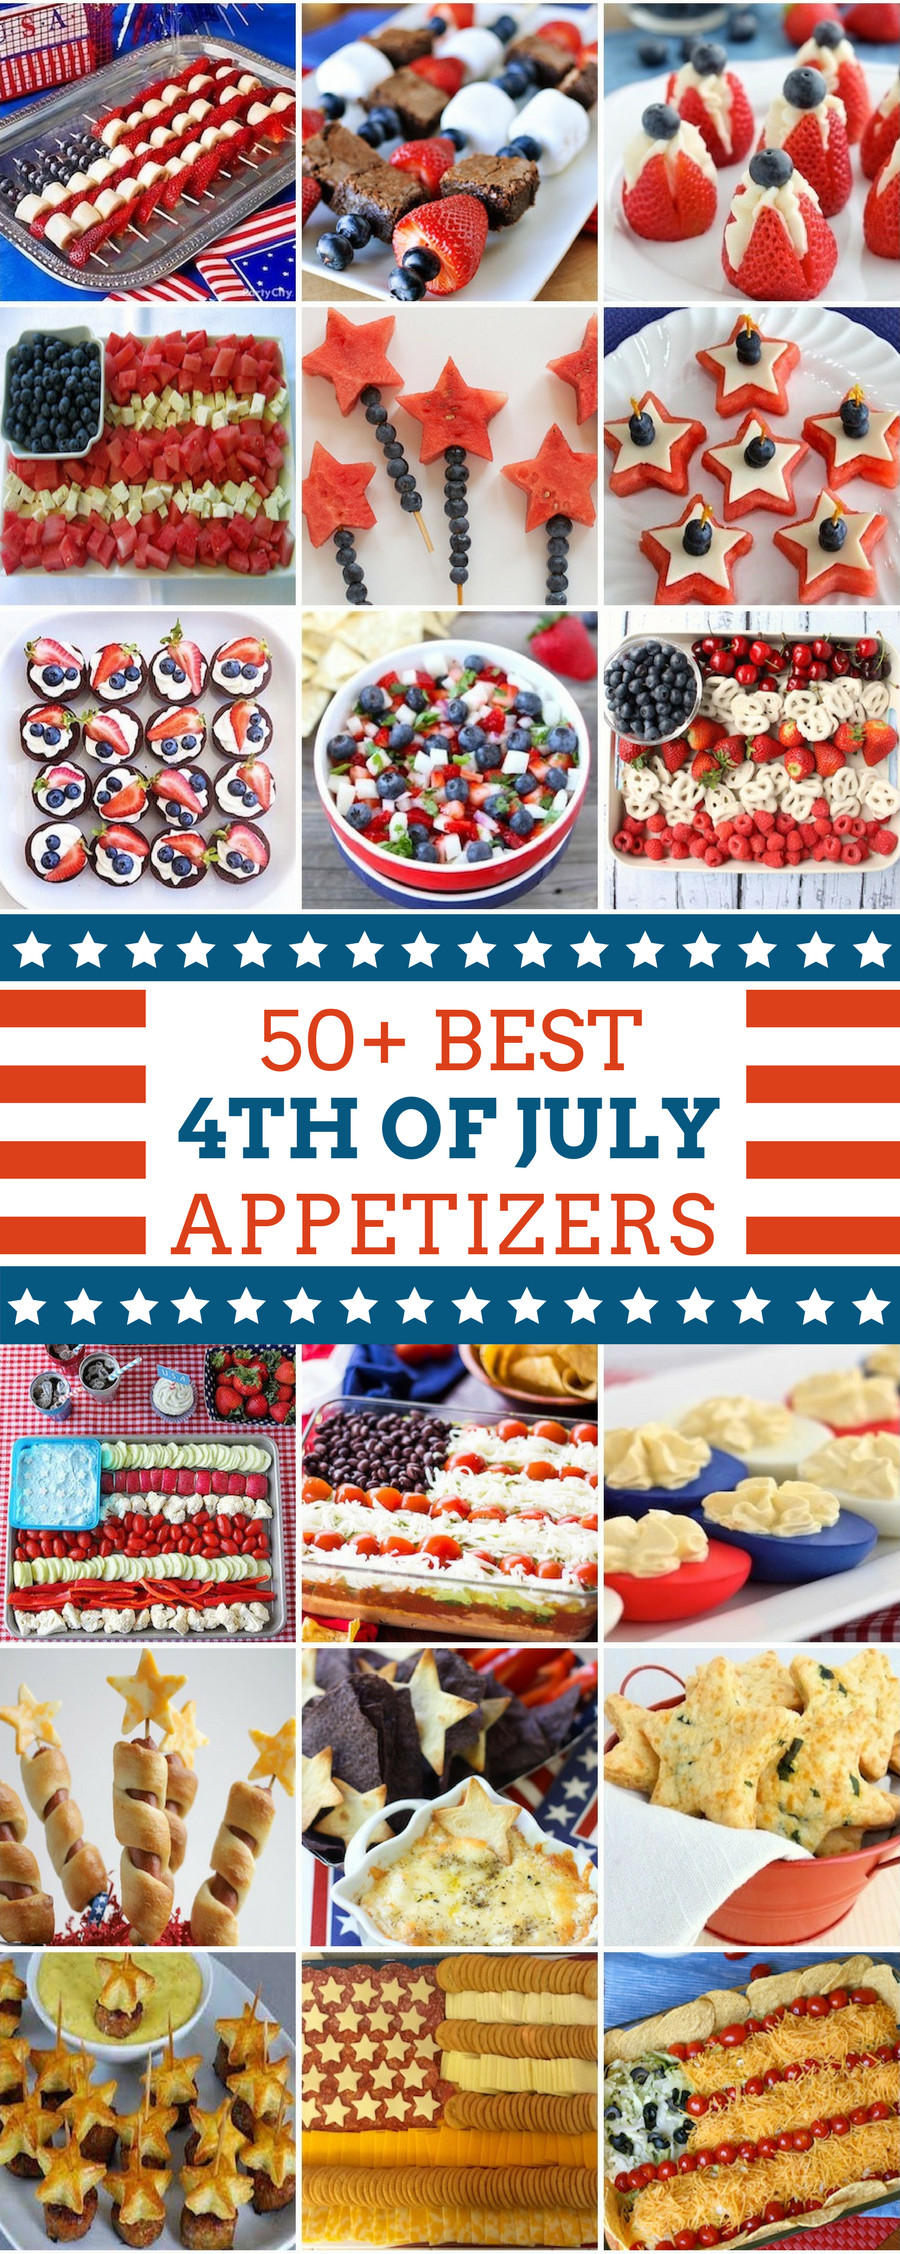 Best 4Th Of July Appetizers
 50 Best 4th of July Appetizers Prudent Penny Pincher